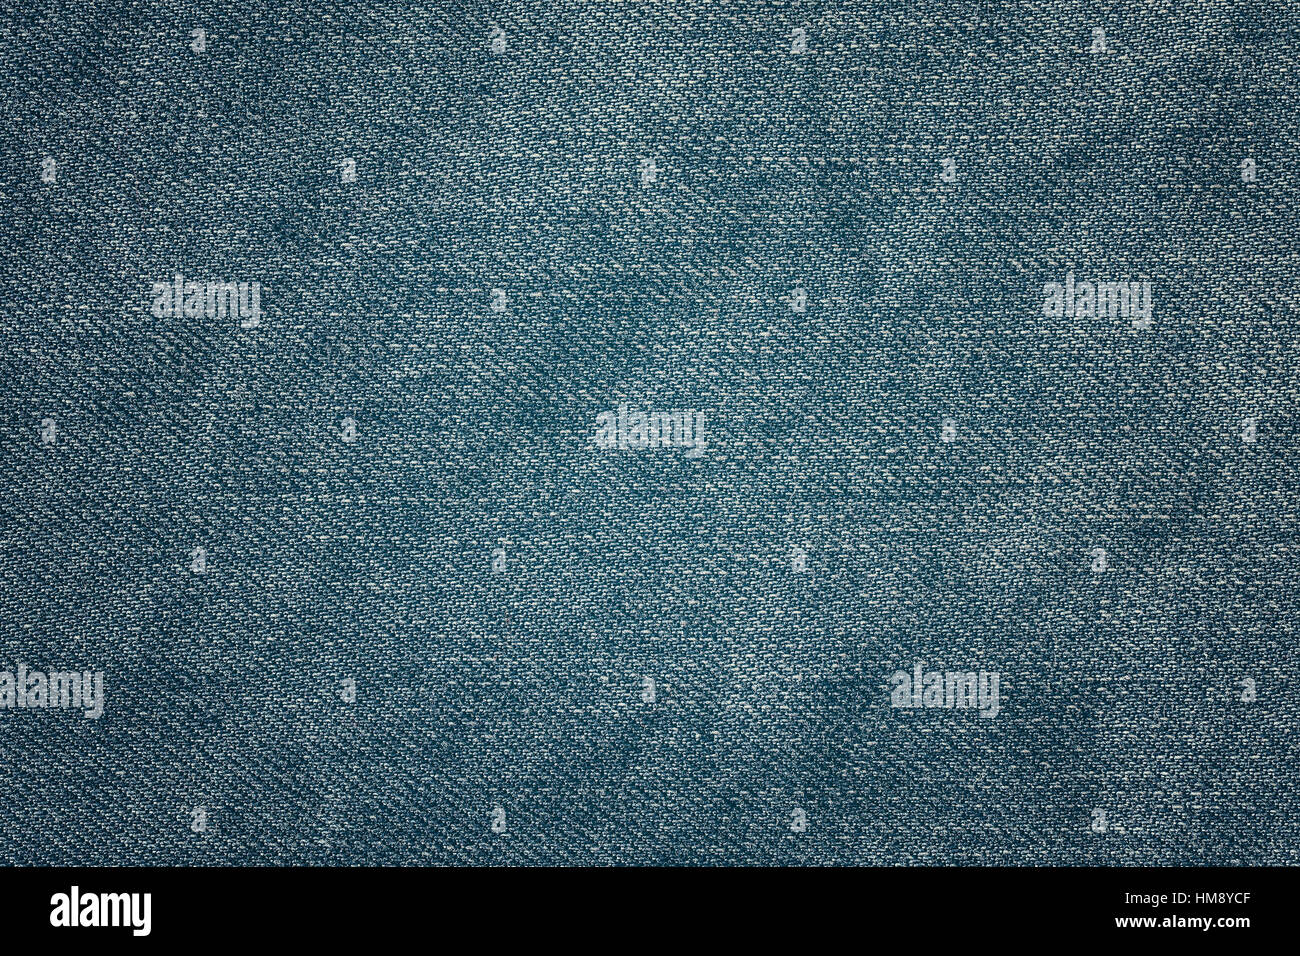 Close up picture of jeans fabric, background or texture. Stock Photo